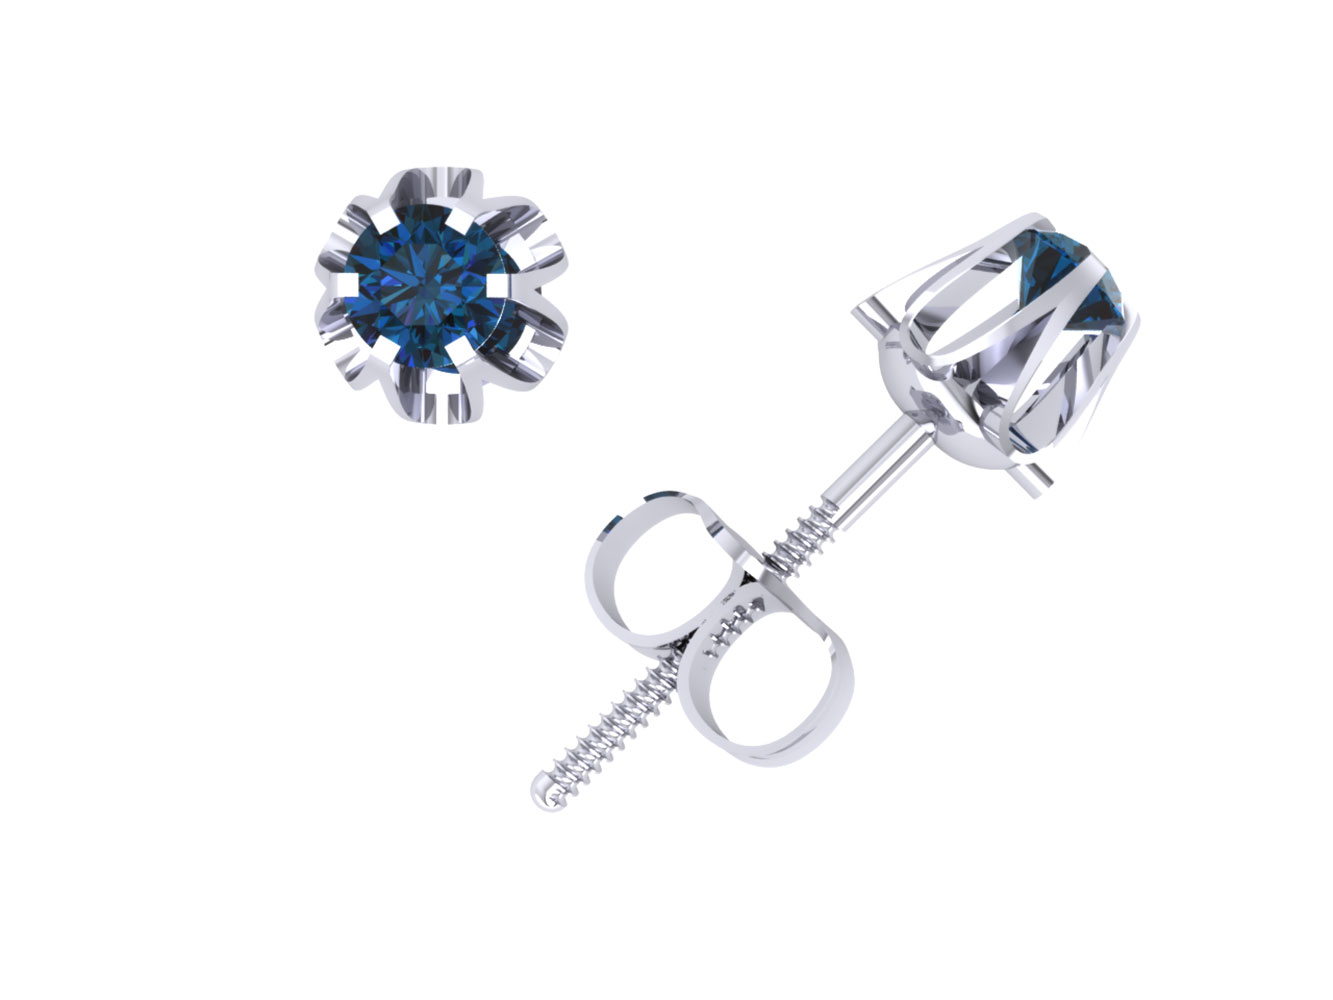 Jewel We Sell 0.20Ct Round Cut Blue Diamond Buttercup Stud Earrings 14k White or Yellow Gold 6Prong SI2